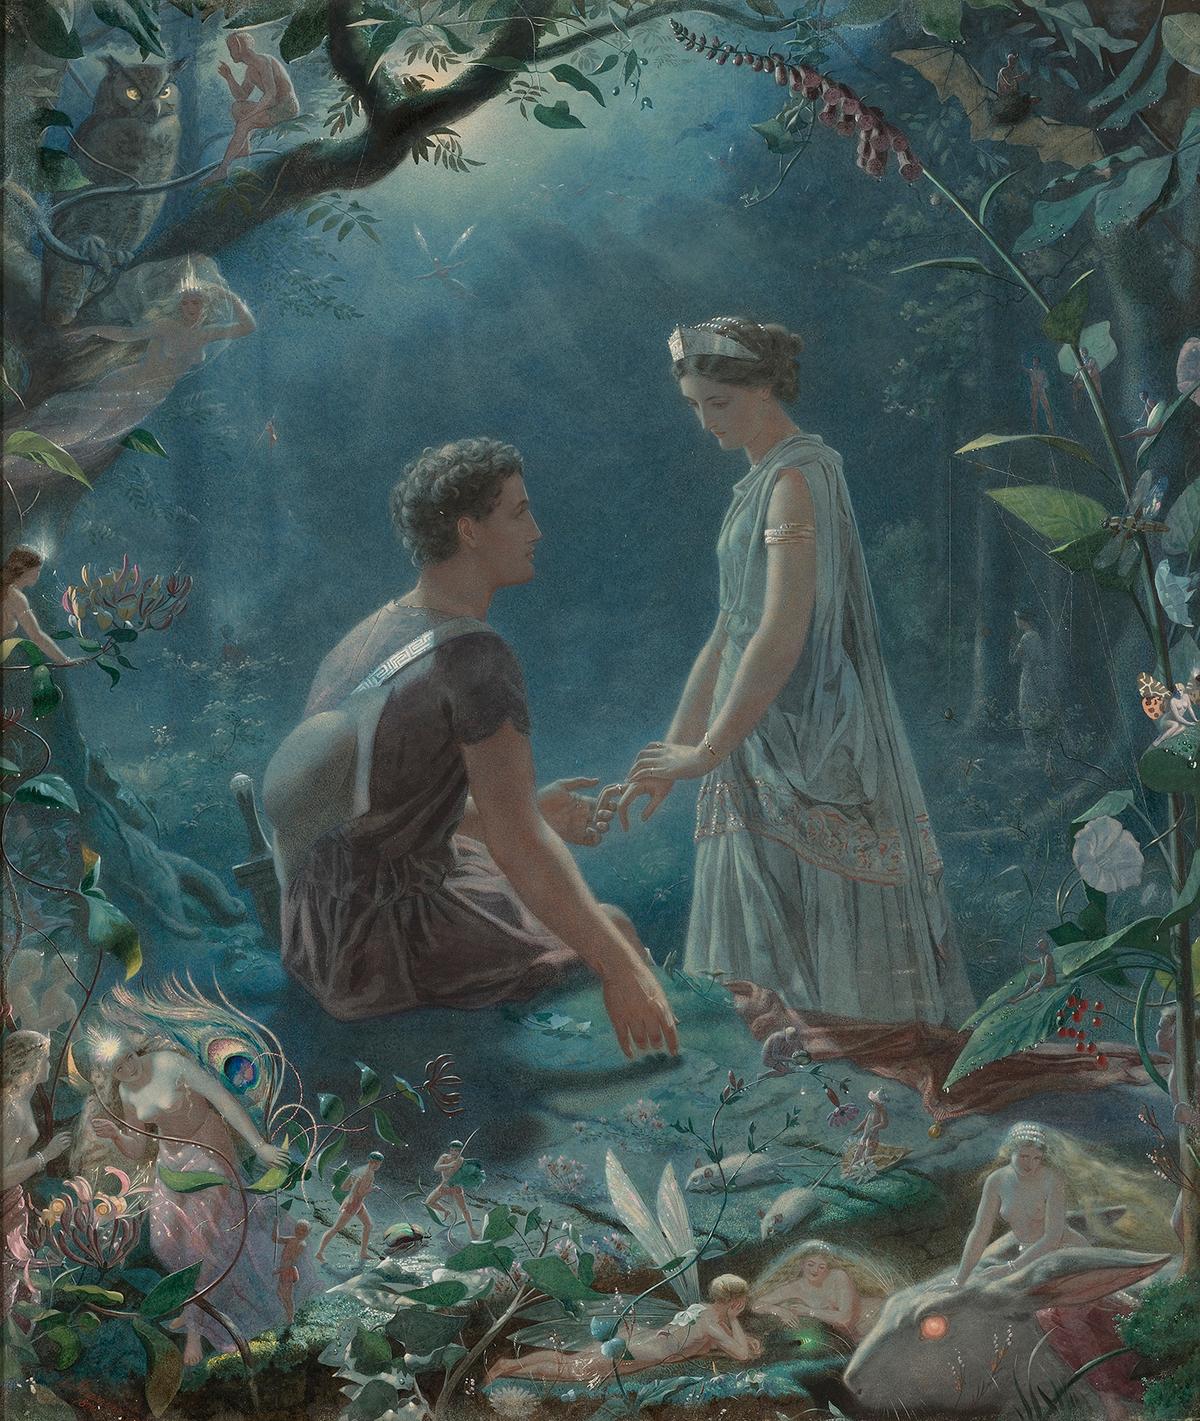 "Hermia and Lysander, 'A Midsummer Night's Dream,'" 1870, by John Simmons. Watercolor heightened with gouache on paper laid down on canvas; 36 inches by 29 inches. Private Collection. (Public Domain)